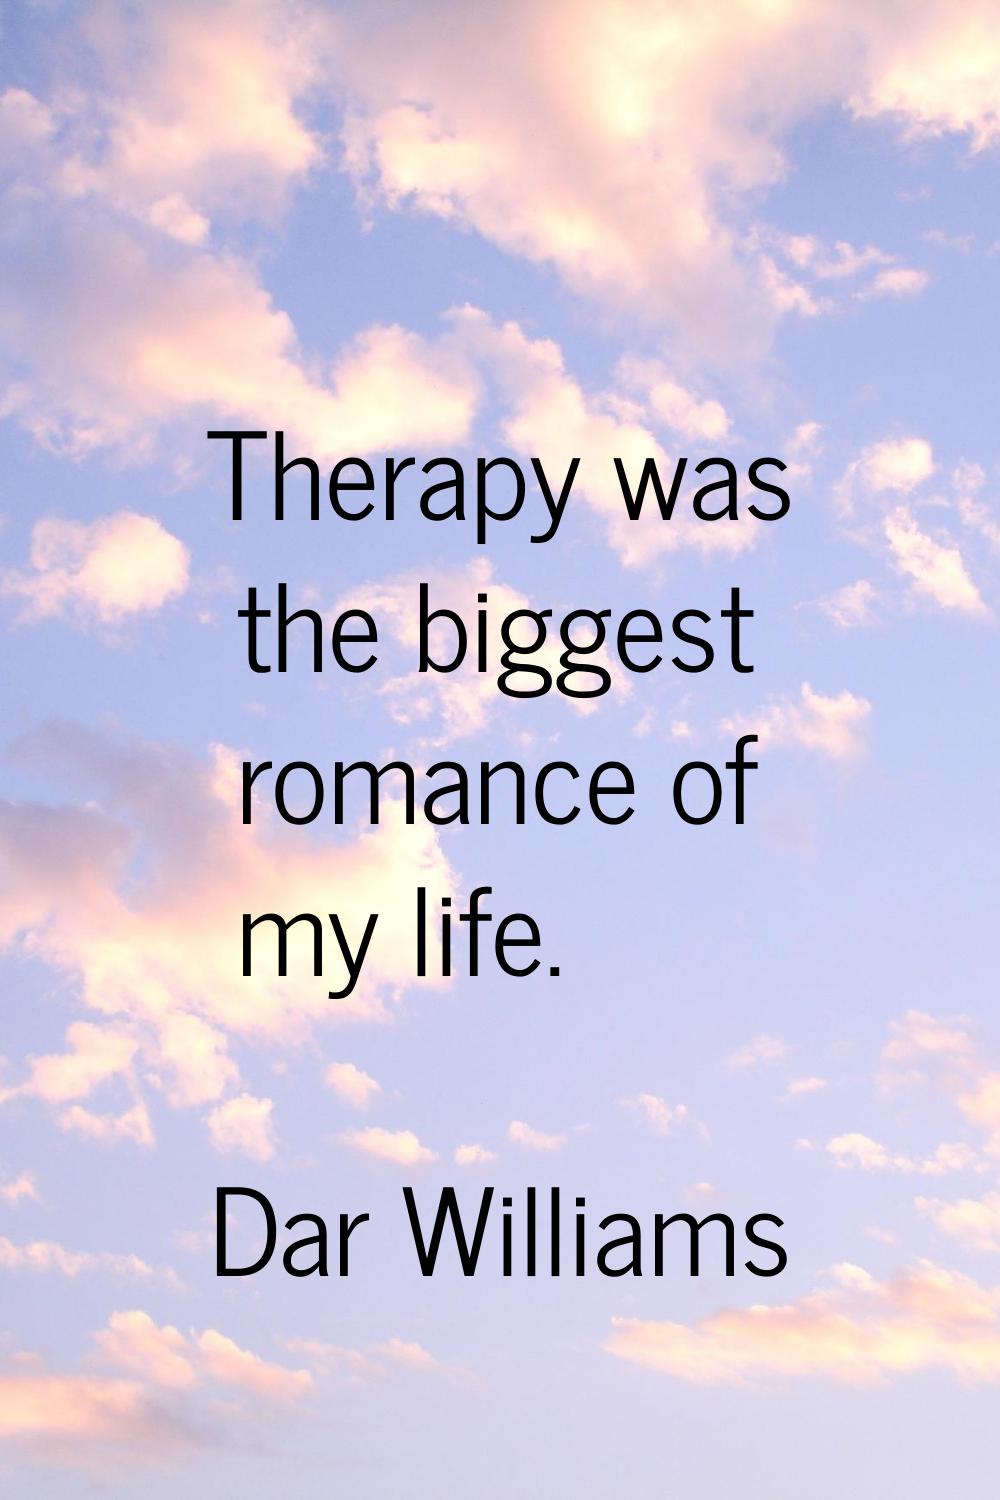 Therapy was the biggest romance of my life.